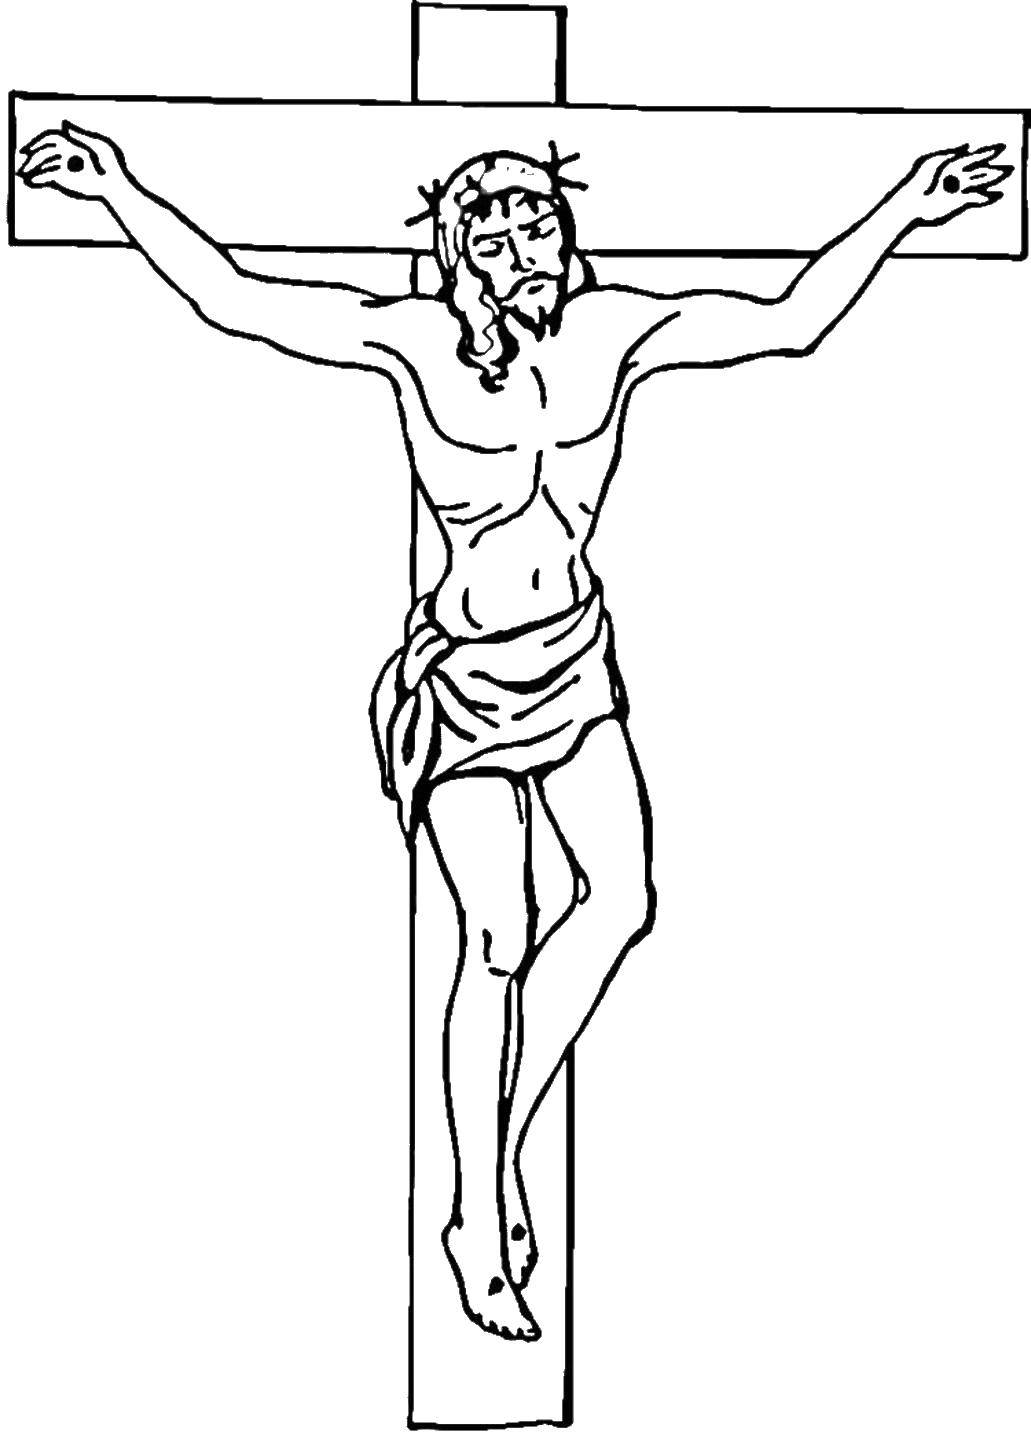 Coloring Jesus on the cross. Category Cross. Tags:  religion.